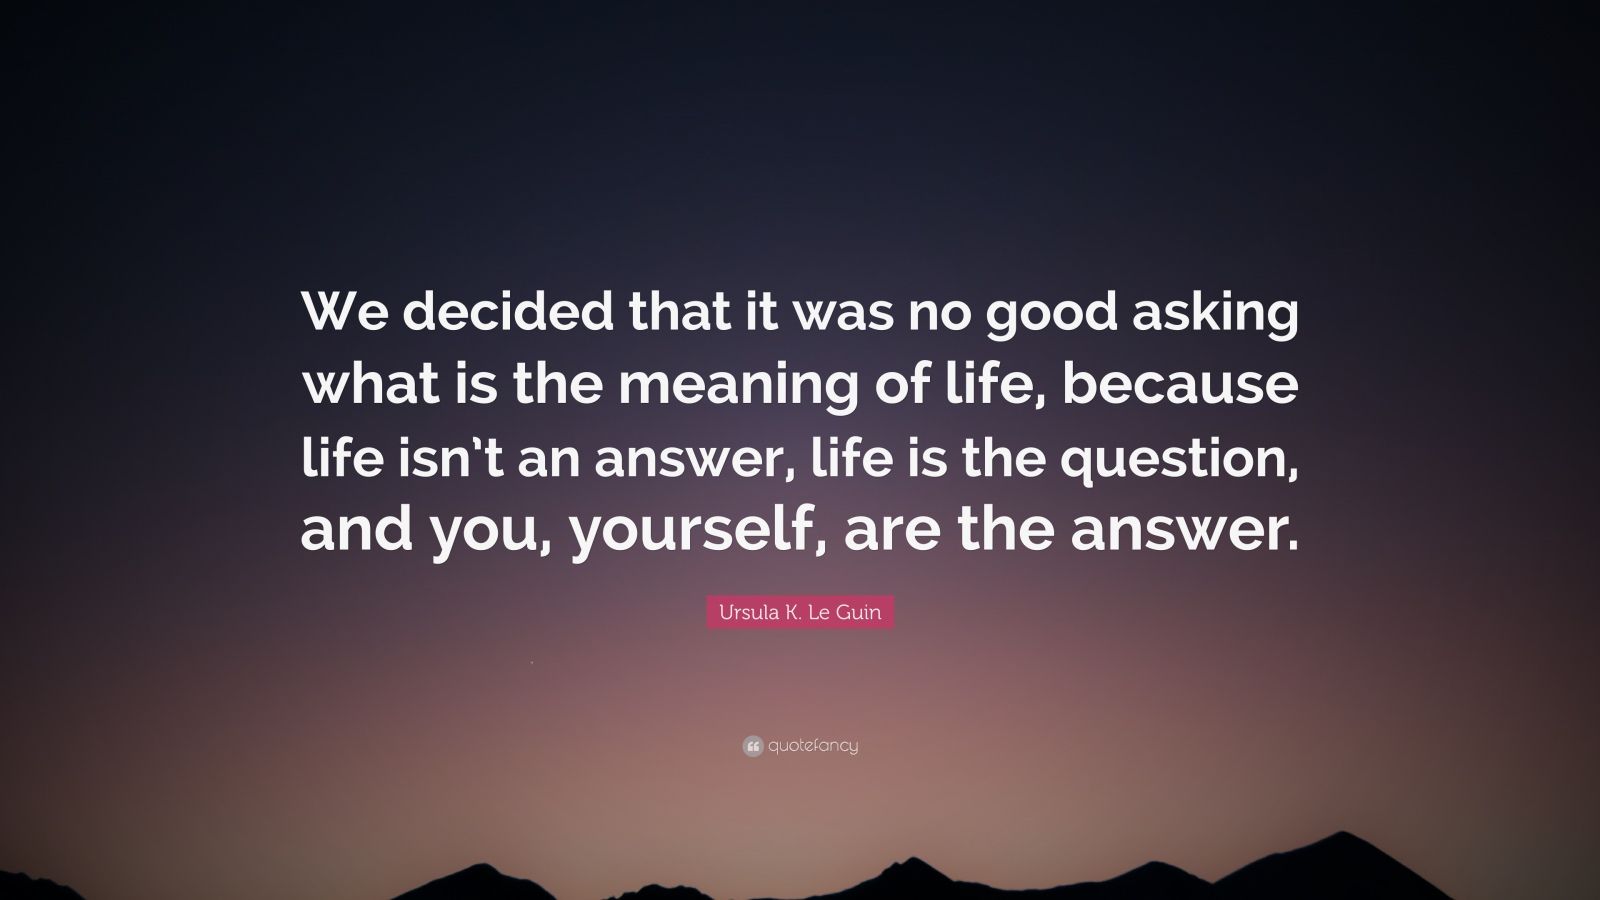 Ursula K. Le Guin Quote: “We decided that it was no good asking what is